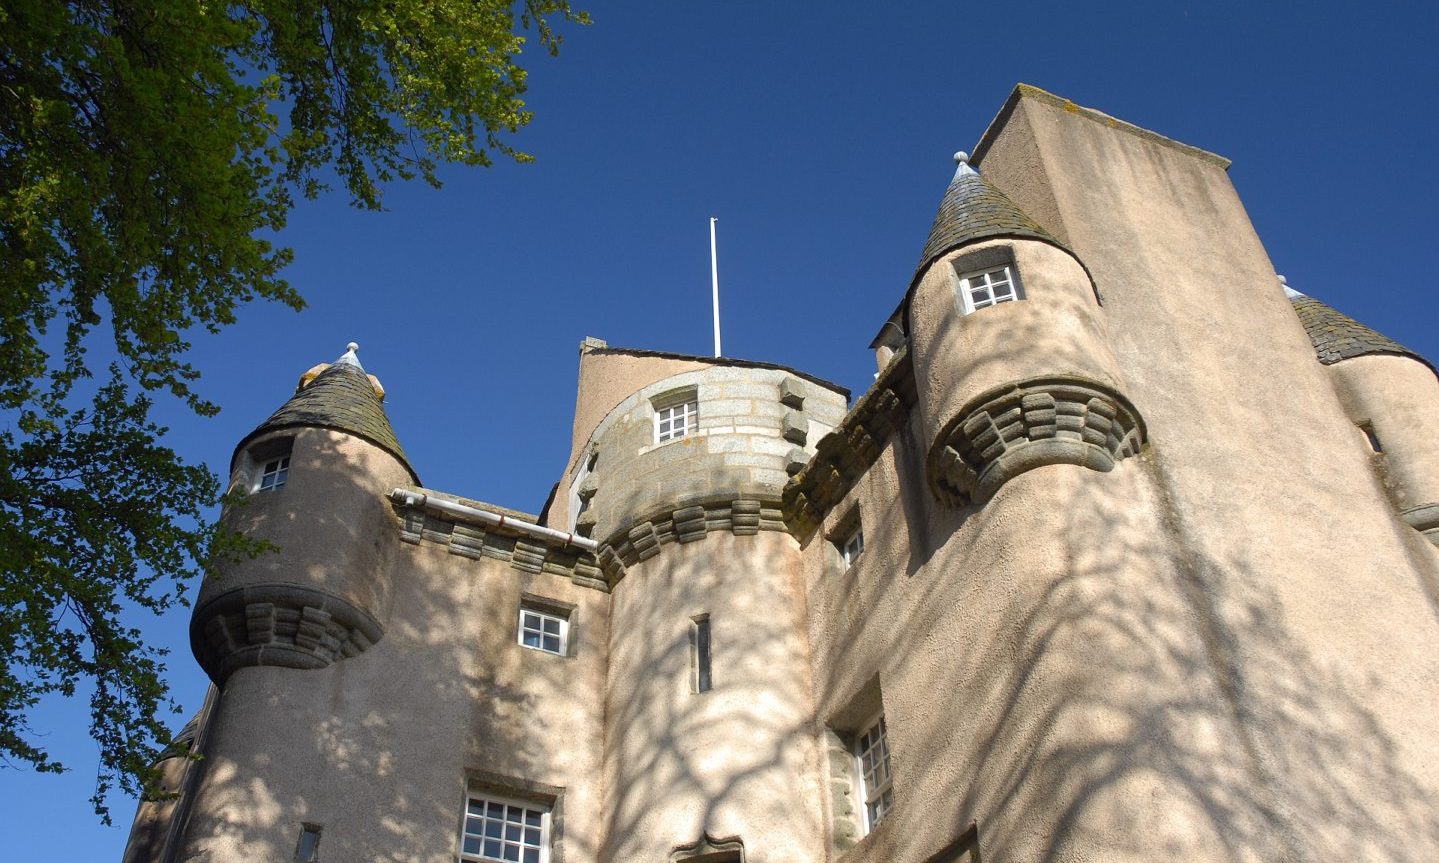 A view of the castle exterior